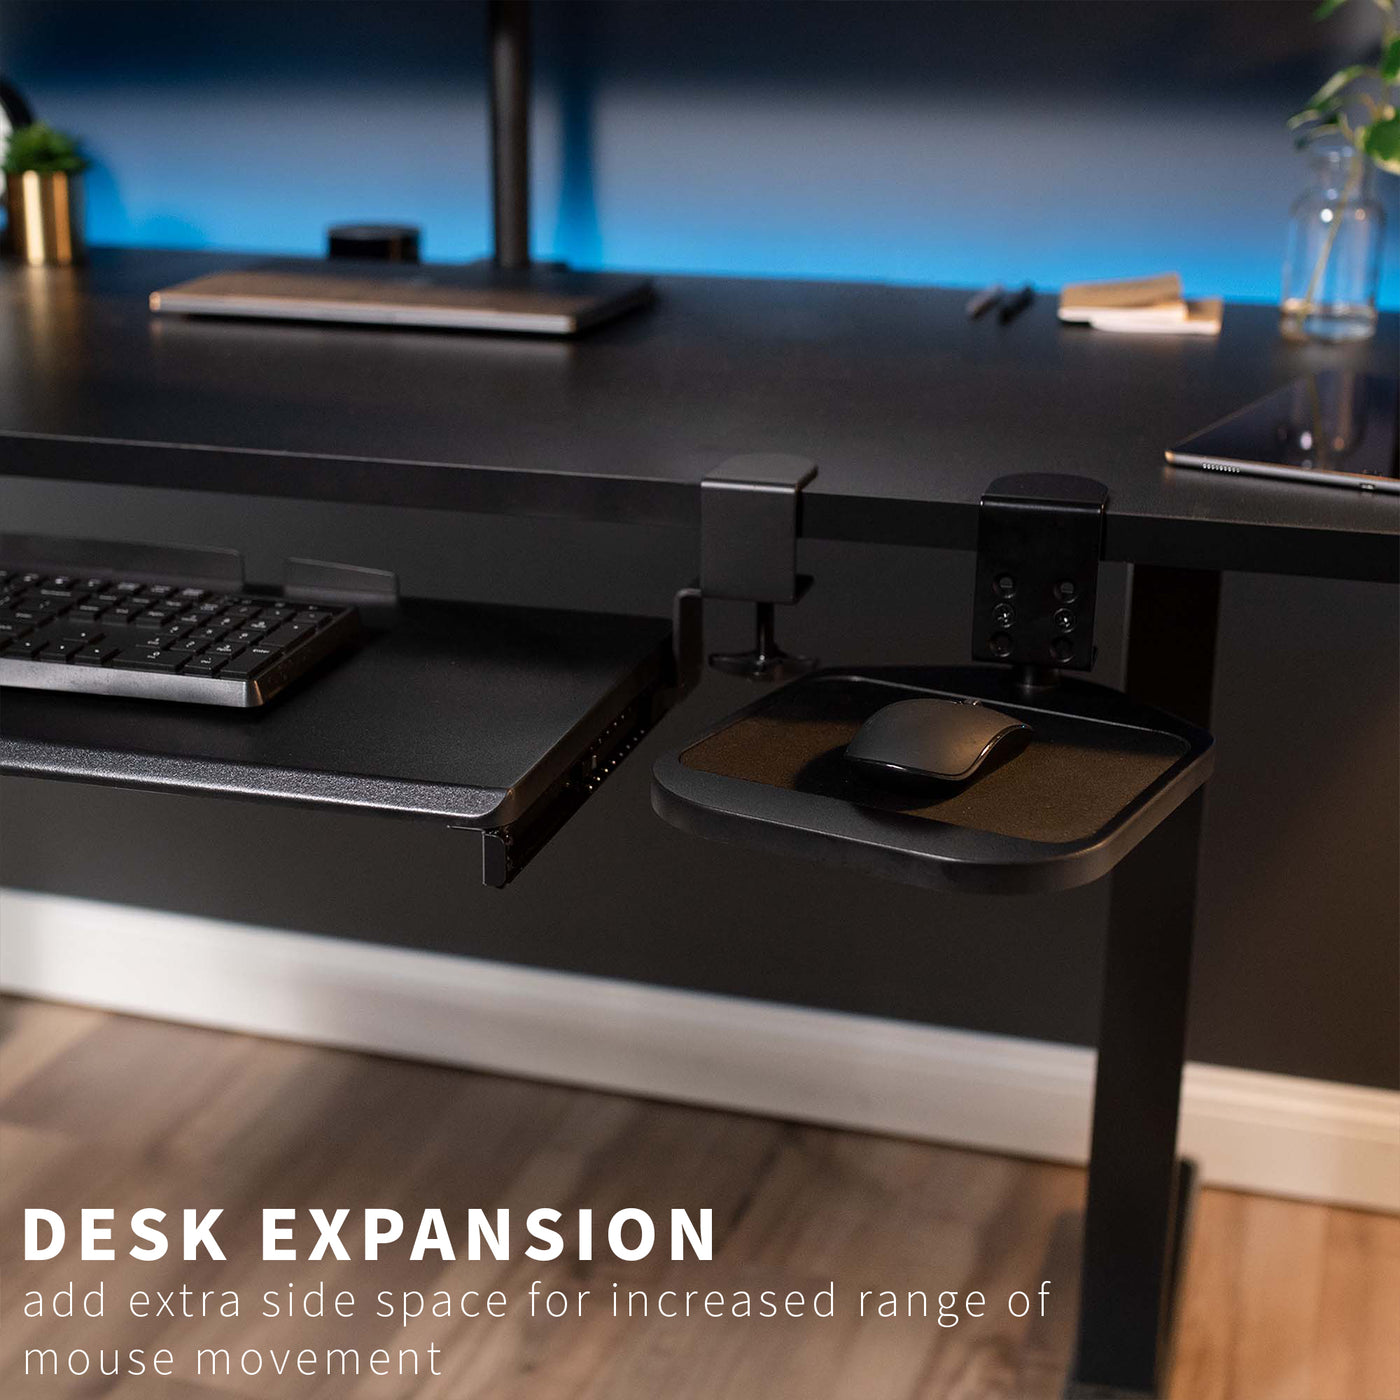 Expansion of desk space with an add-on mouse pad.